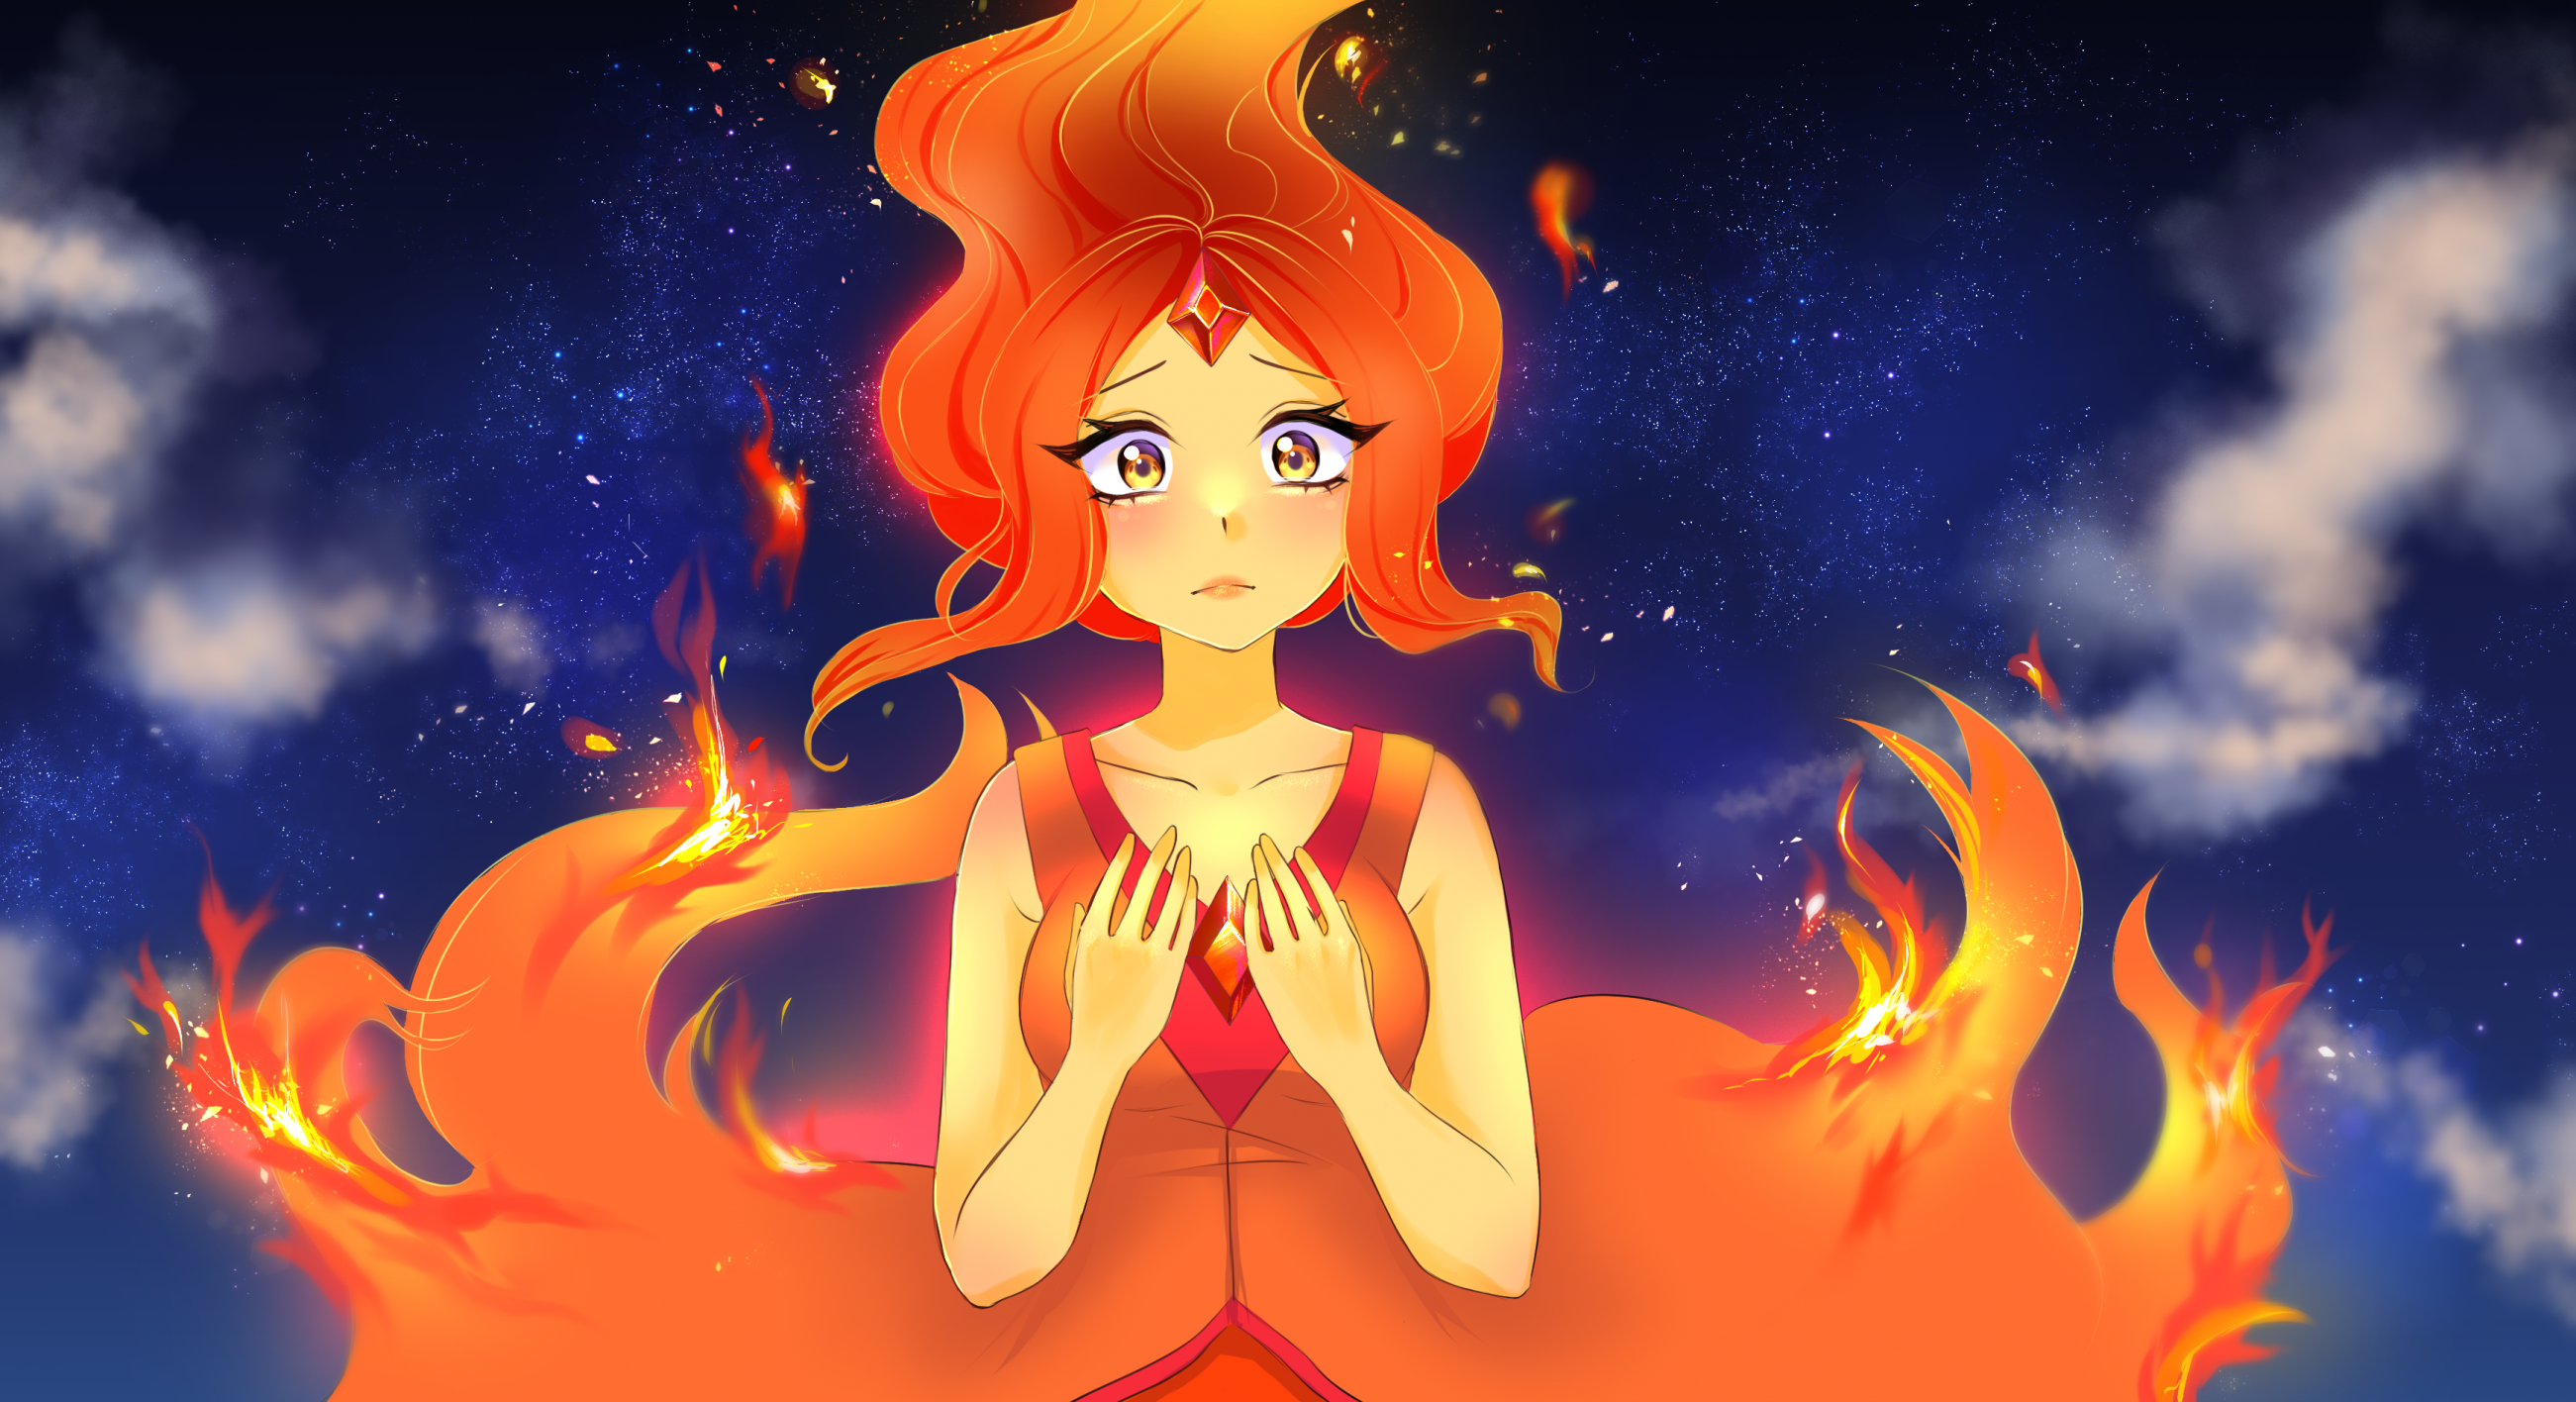 Anime fire princess Outline Drawing Images, Pictures